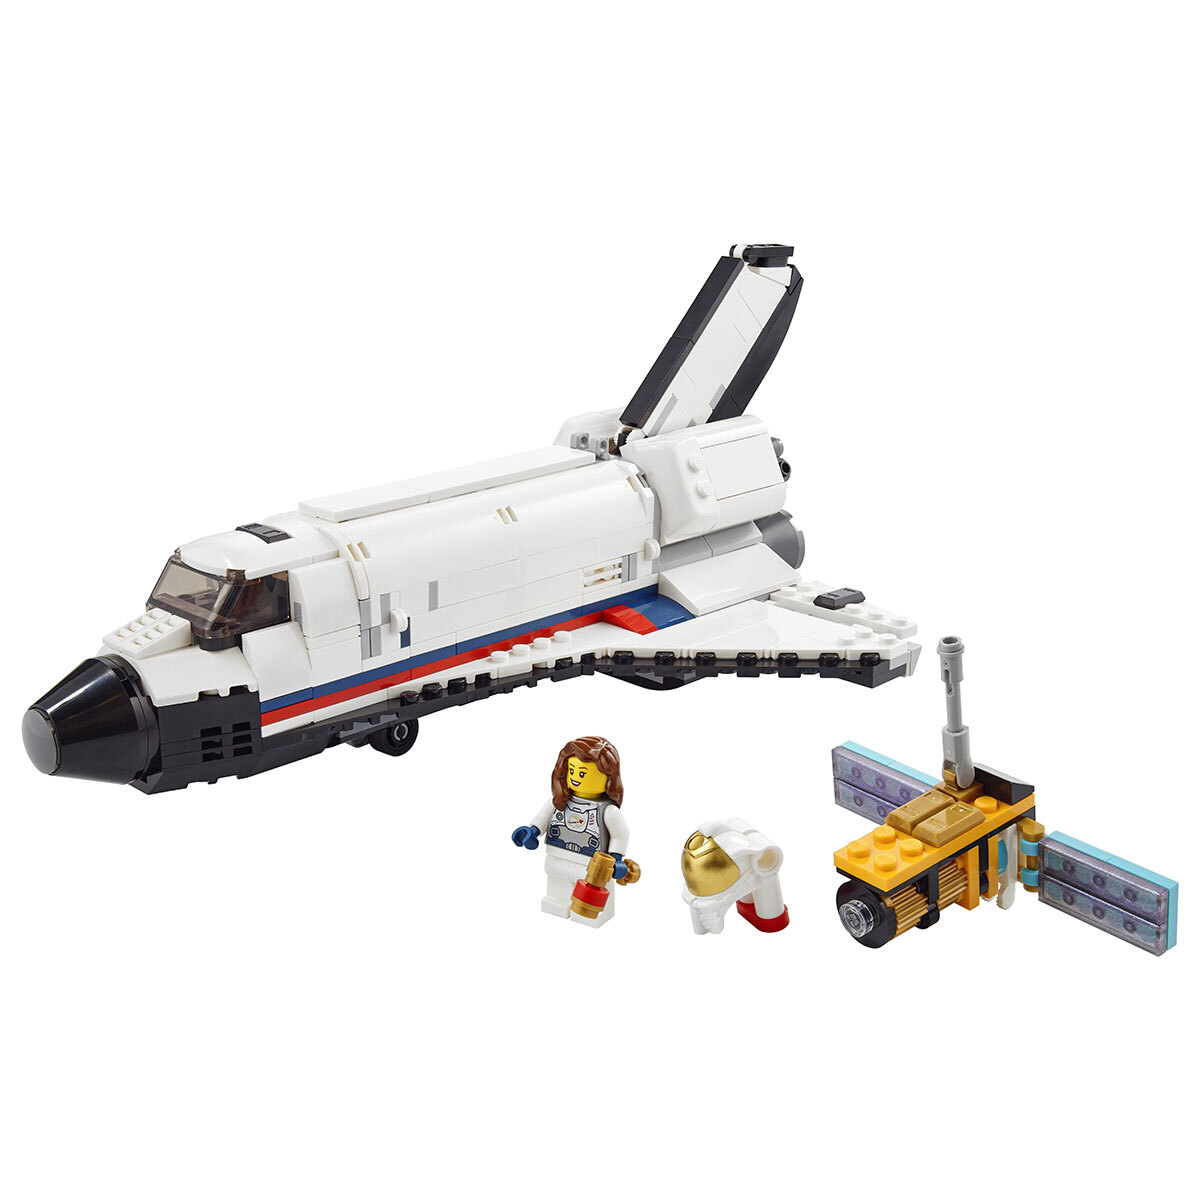 Buy LEGO Creator Space Shuttle Adventure Overview Image at costco.co.uk